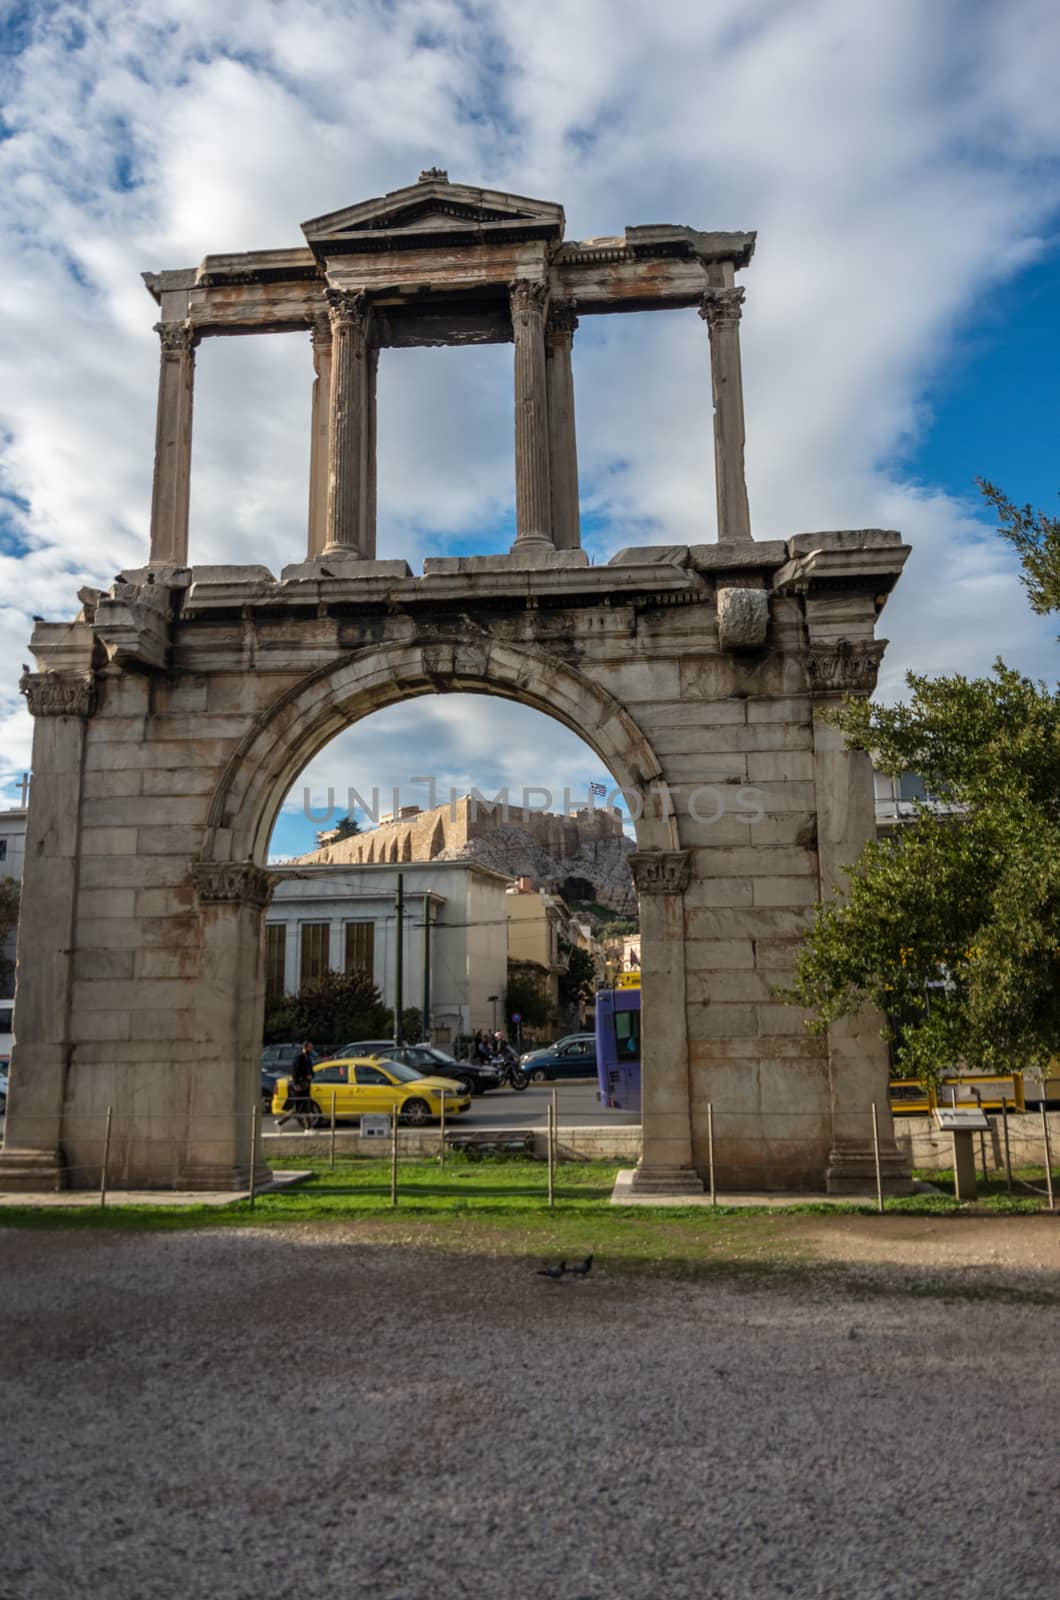 Hadrian's gate ( Arch of Hadrian ) monument in Athens historical center, Greece.